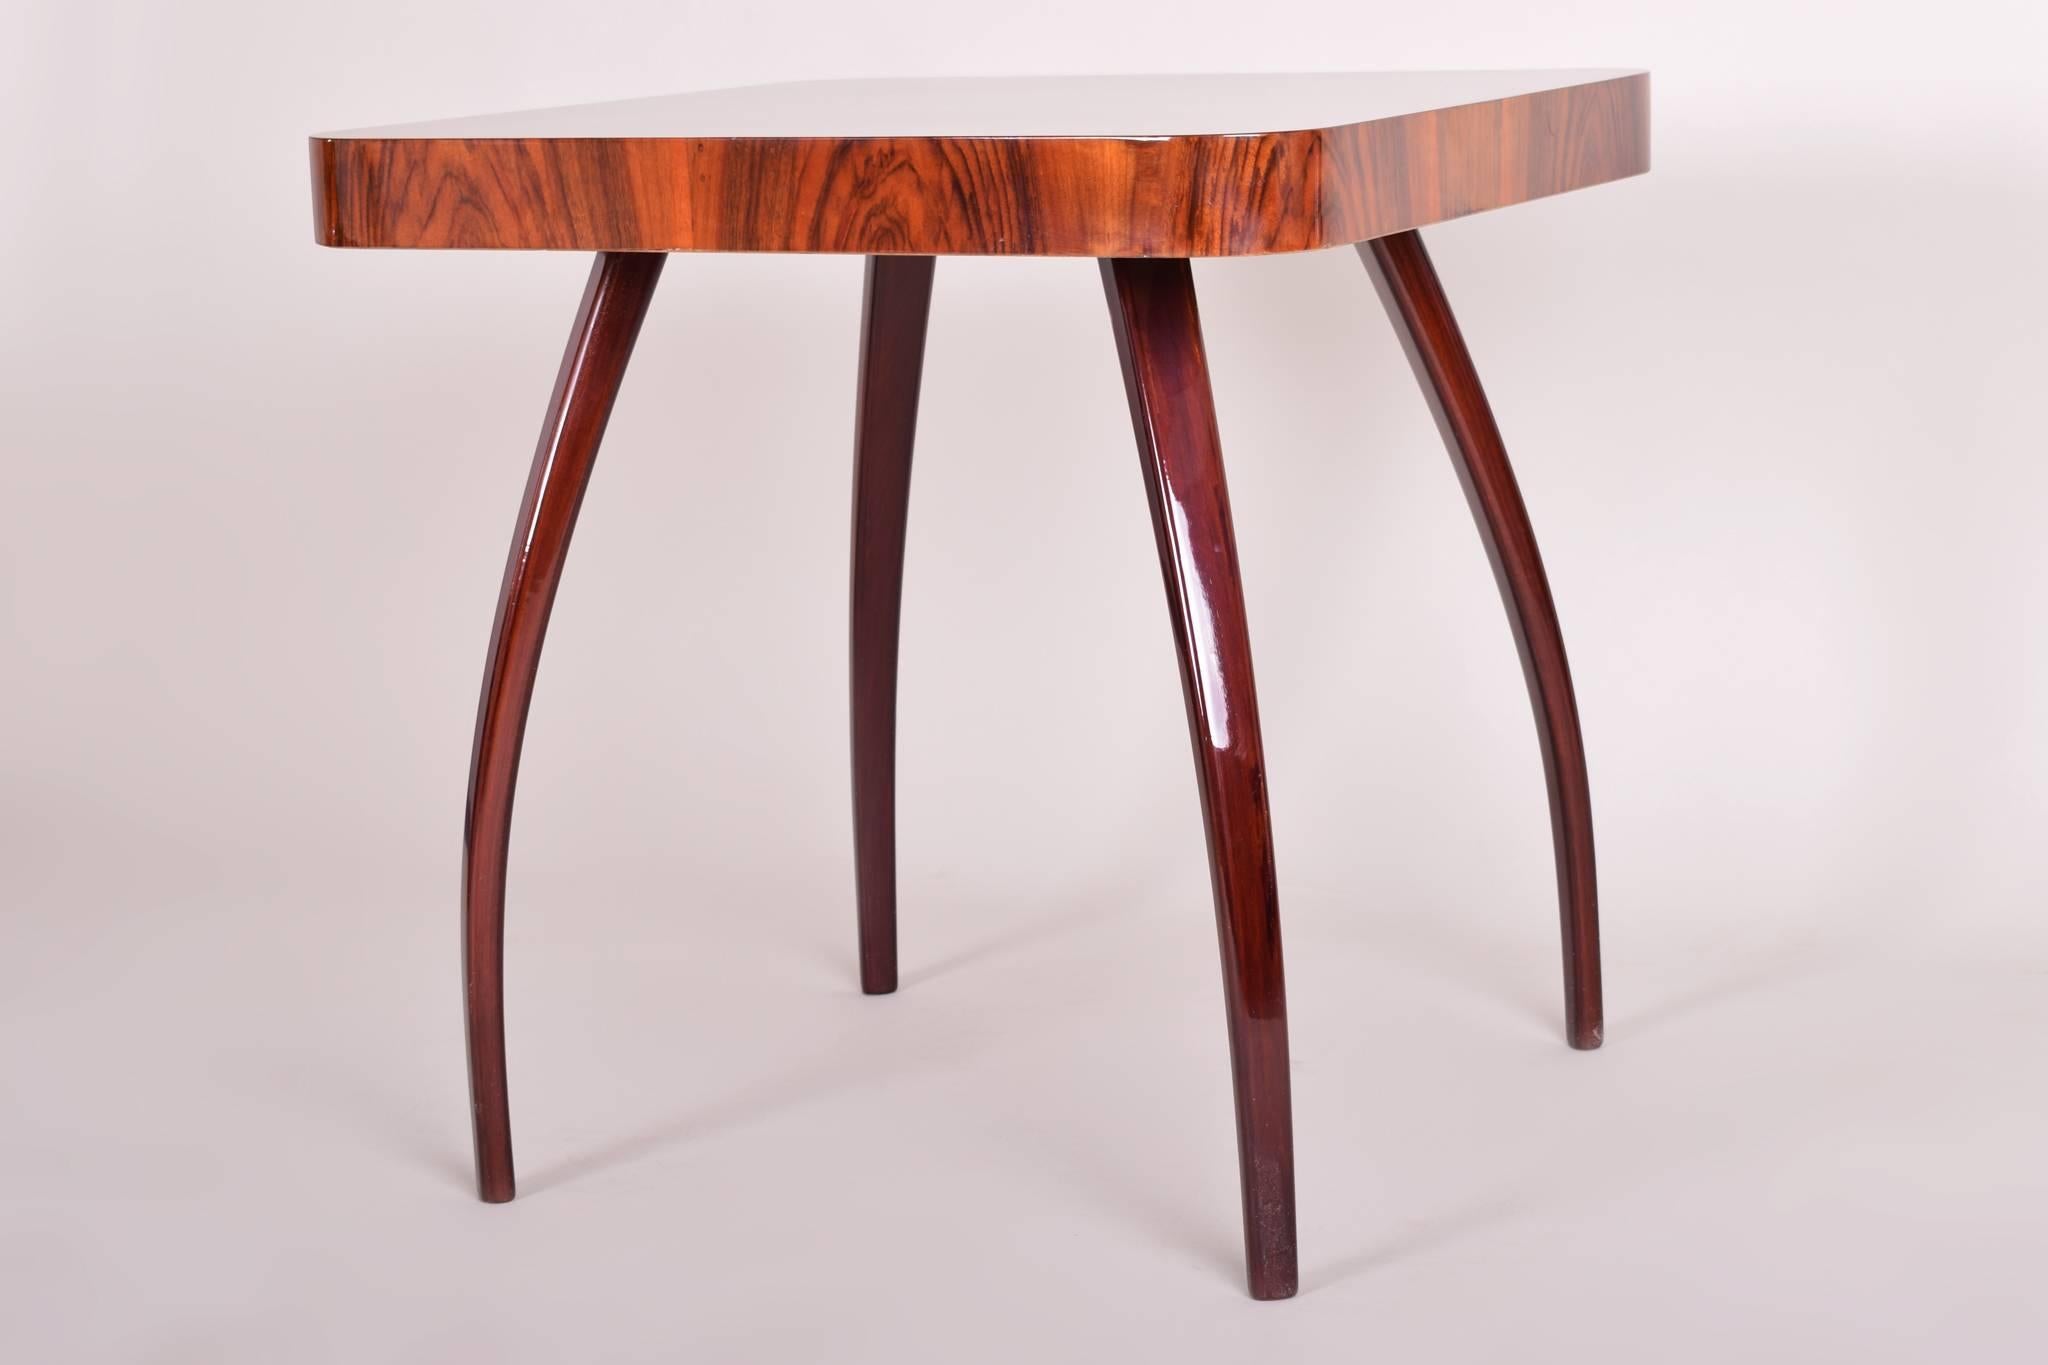 Artdeco table.
Completely restored. 
Walnut veneer. 

We guarantee safe a the cheapest air transport from Europe to the whole world within 7 days.
The price is the same as for ship transport but delivery time is really shorter.
We create a special